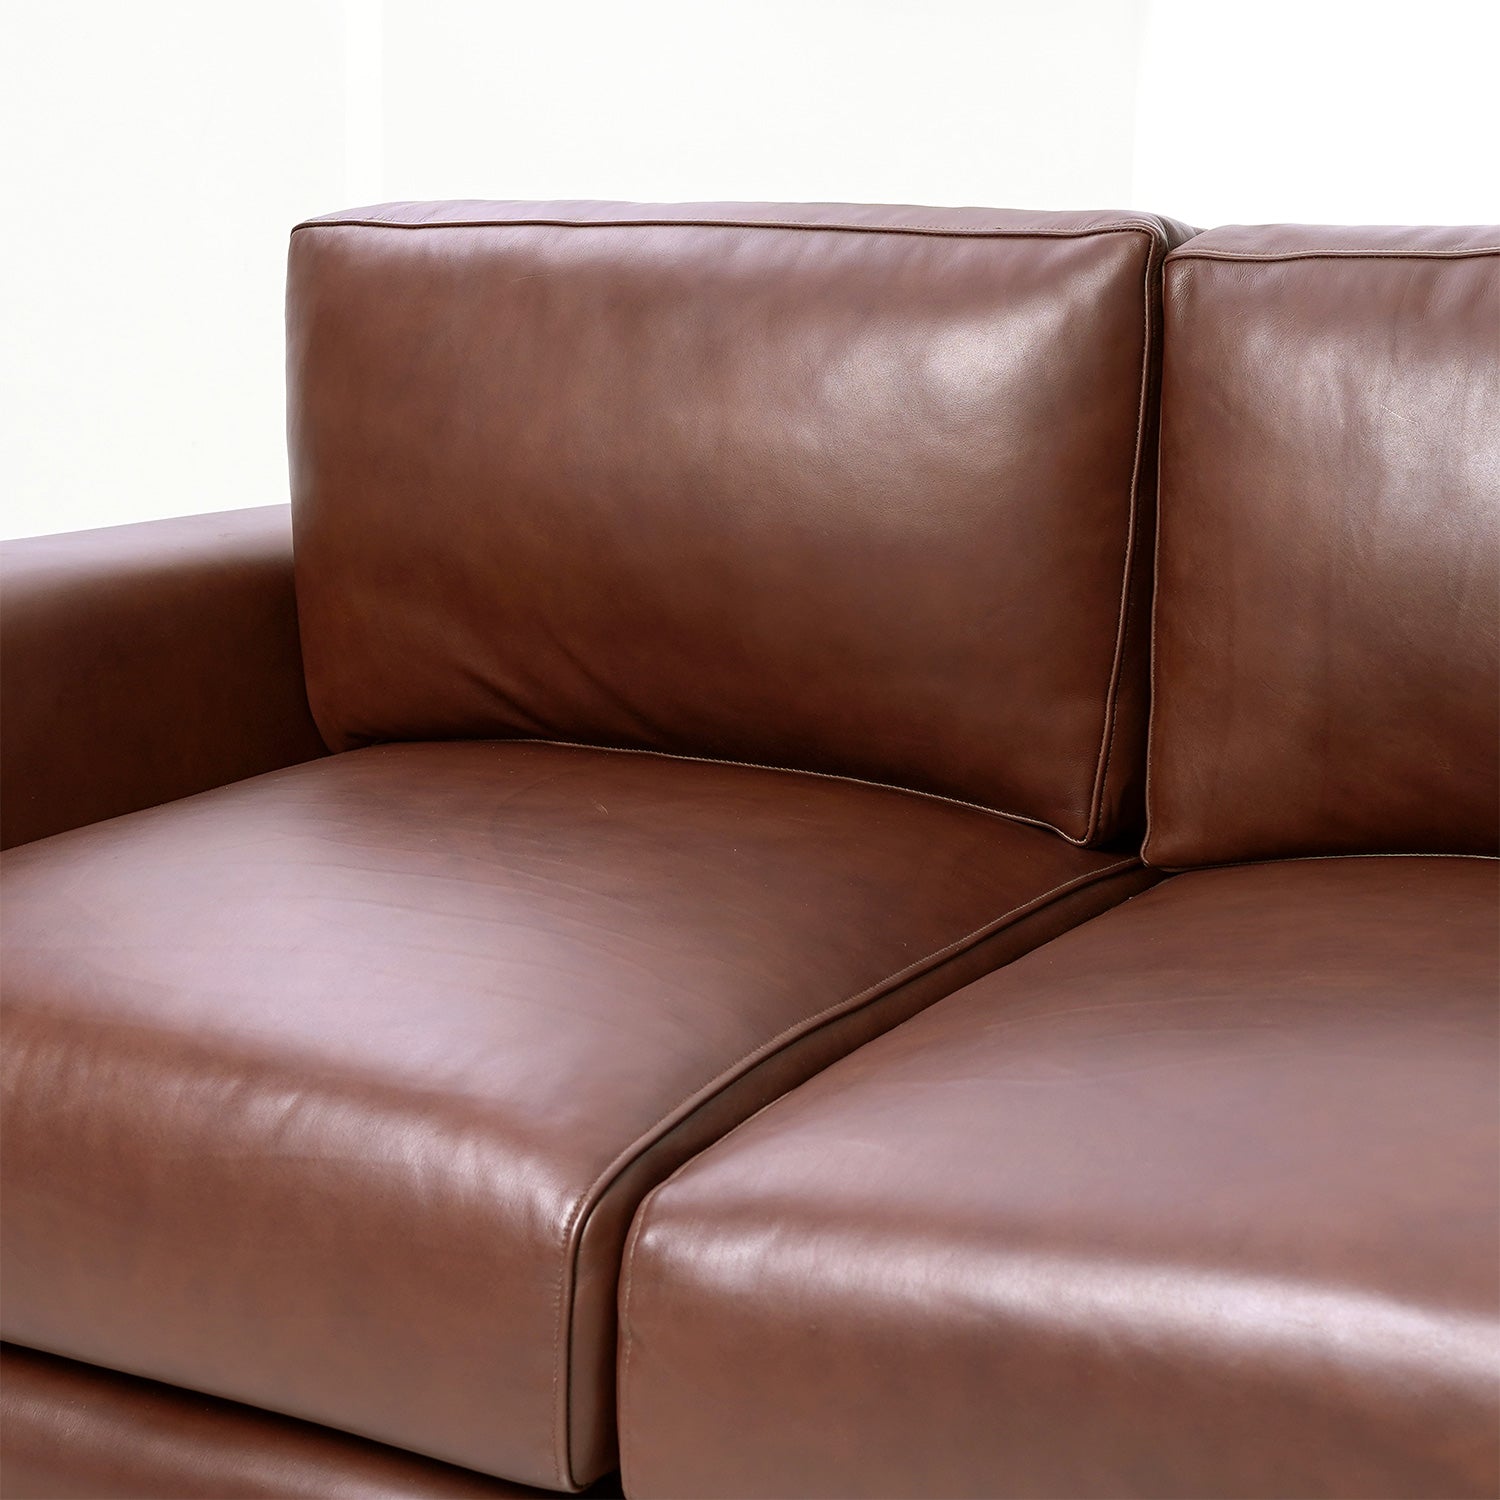 Miles Charm Leather Sofa Russet Front Close Up